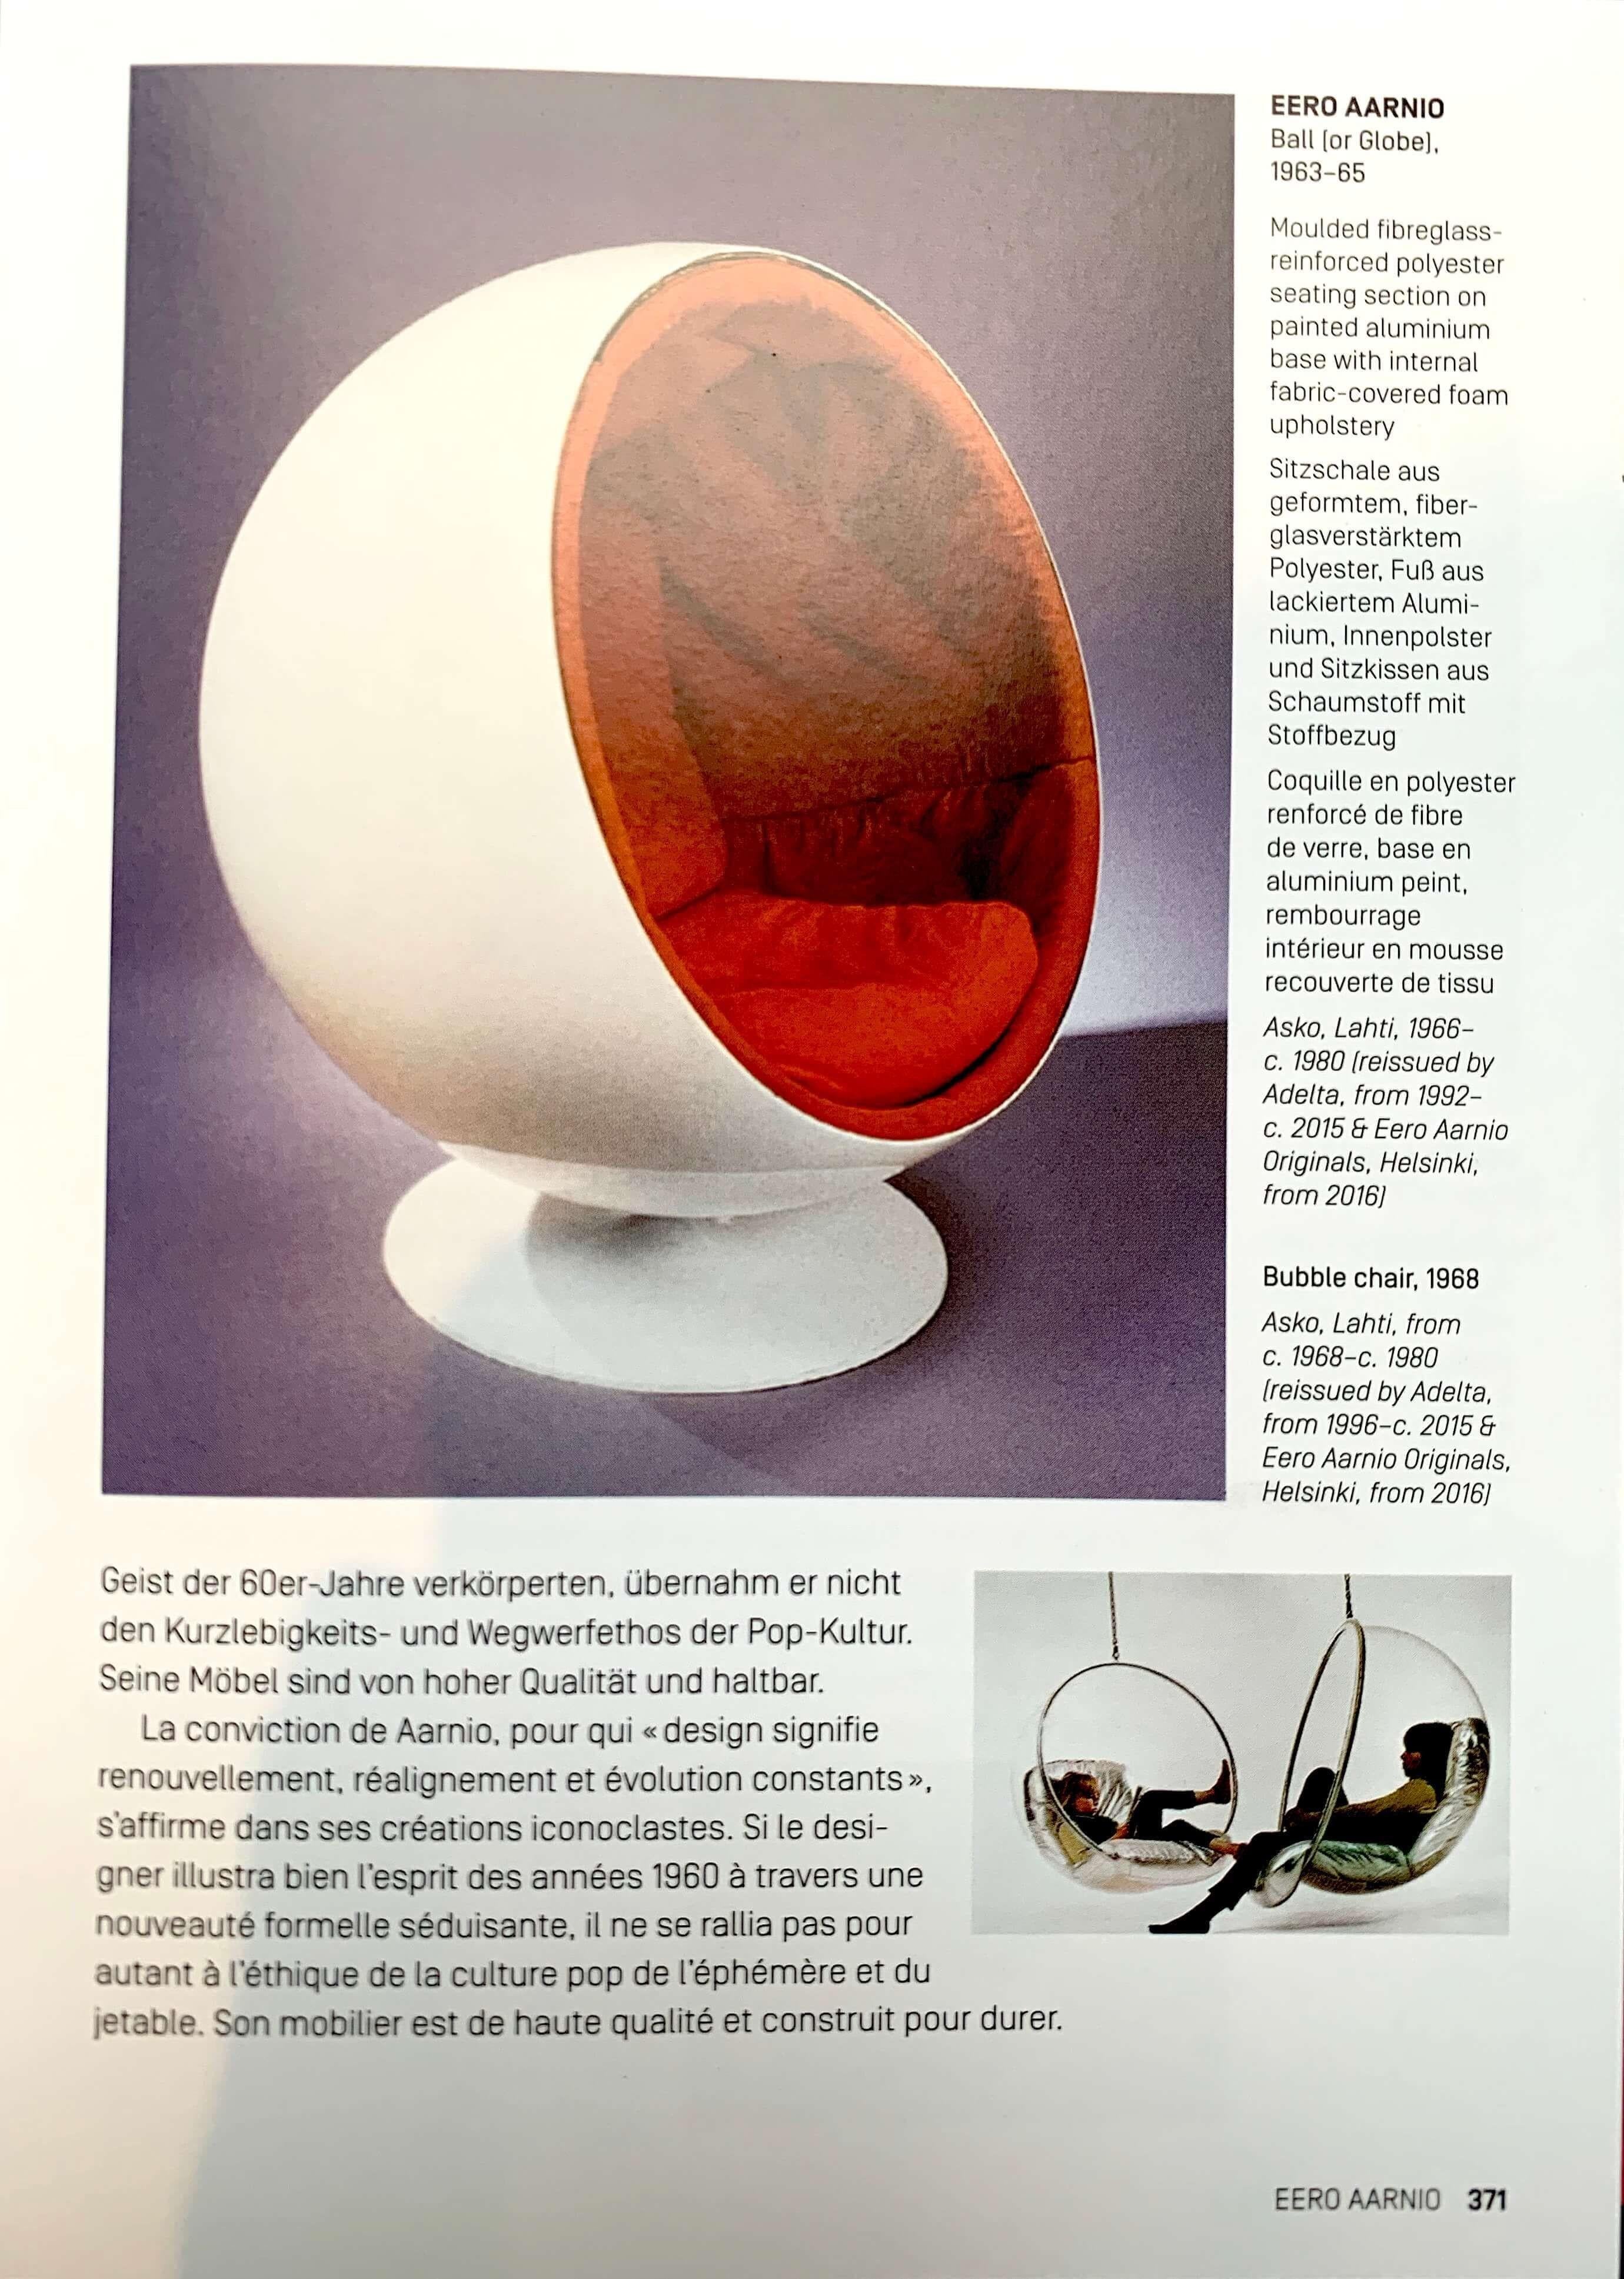 Ball Chair by Eero Aarnio, Orange and White, Adelta, Finland circa 1980/90s 3